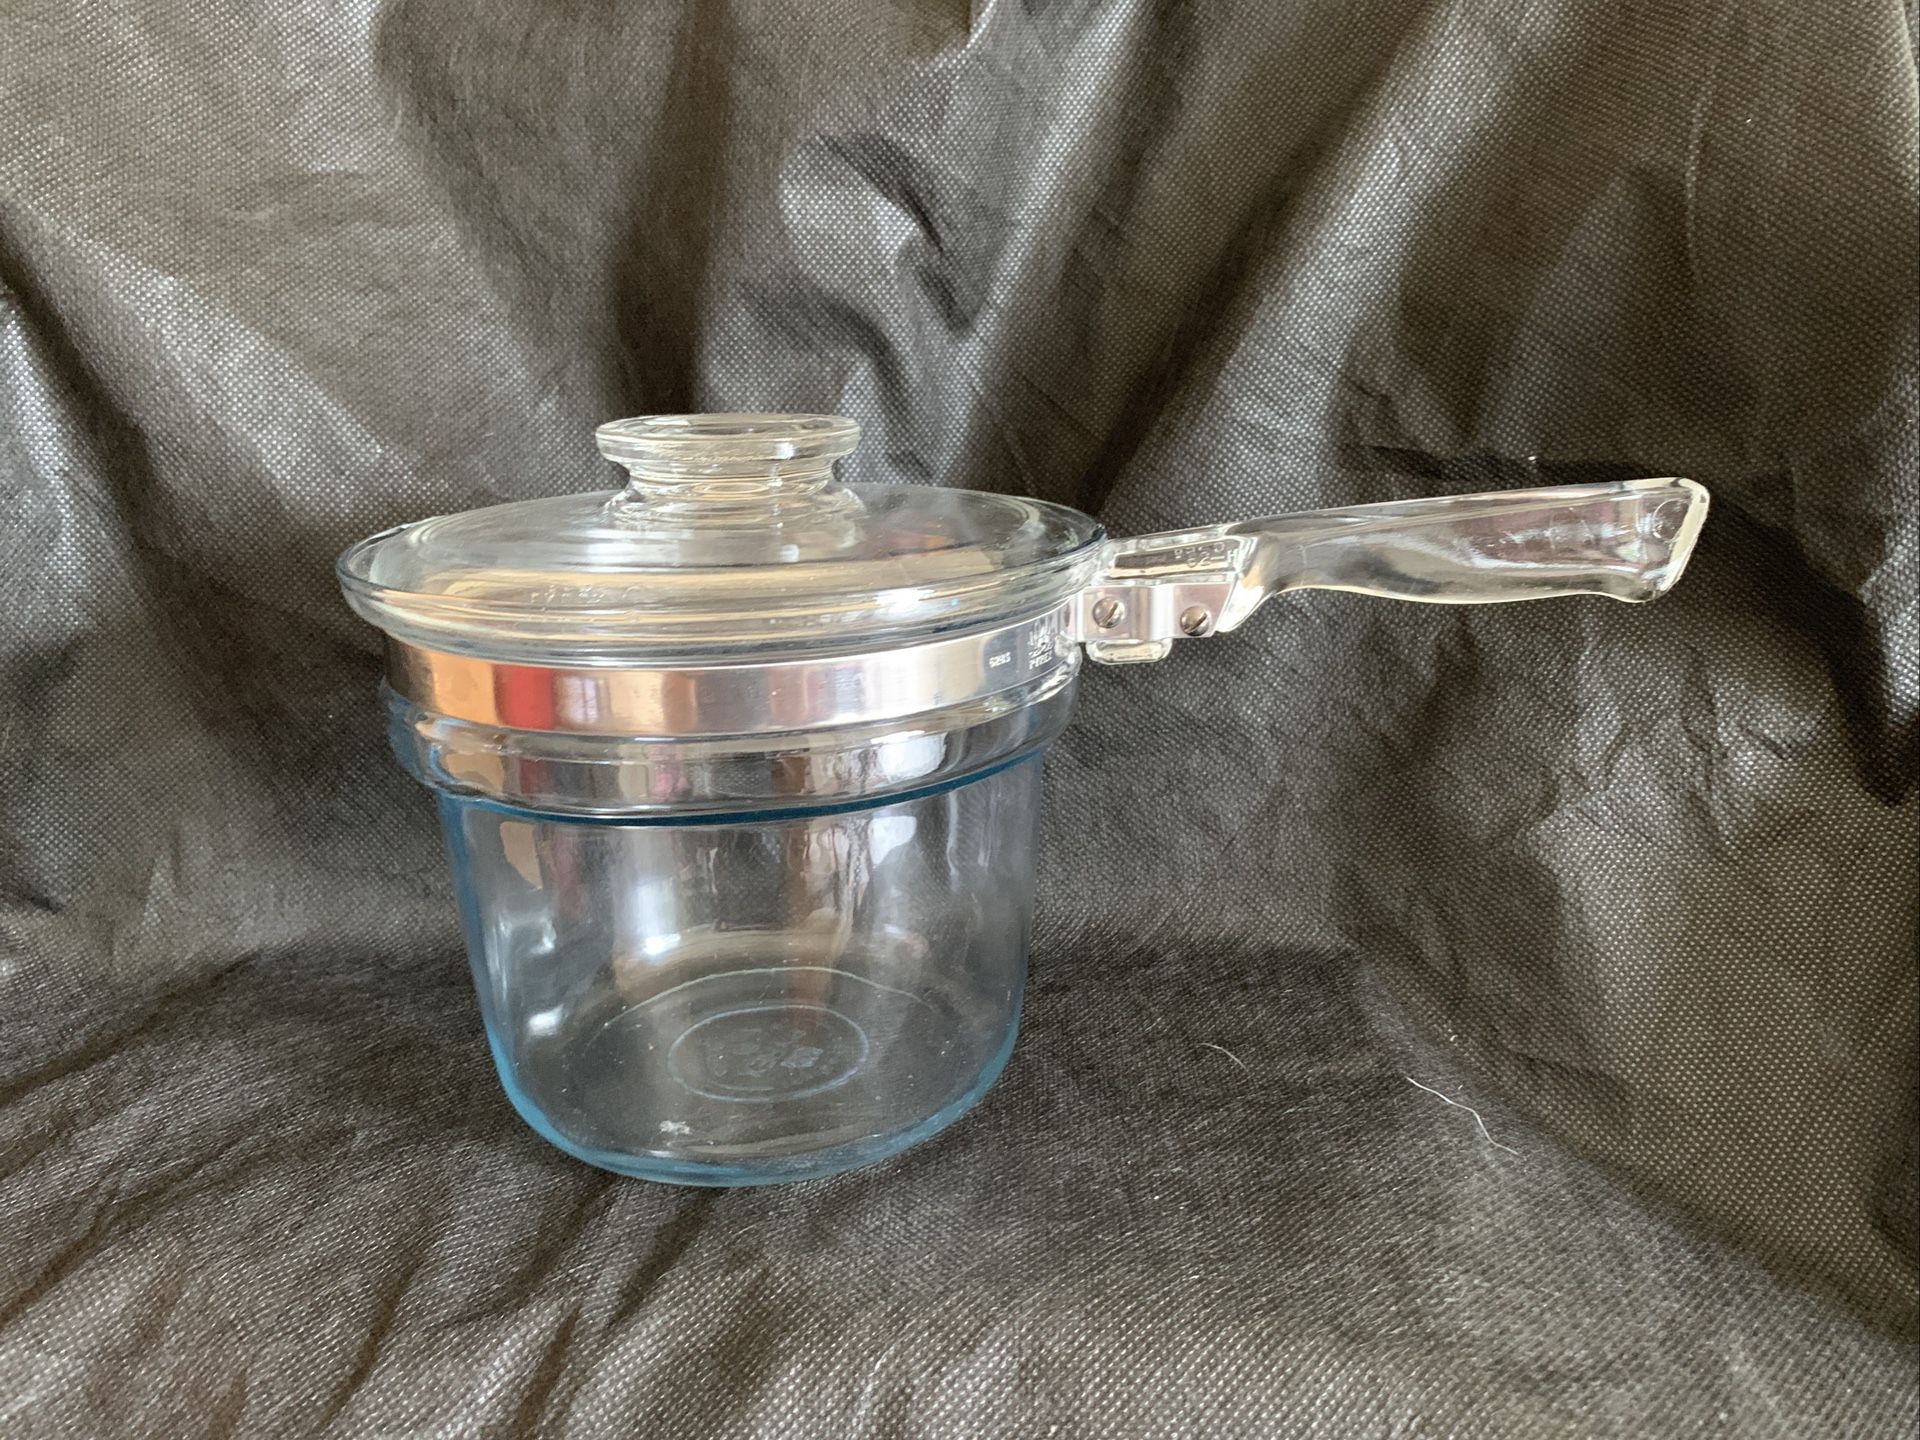 Vintage Pyrex FlameWare 1.5 Quart Glass Boiler With Lid 6283-U for Sale in  Lacey, WA - OfferUp